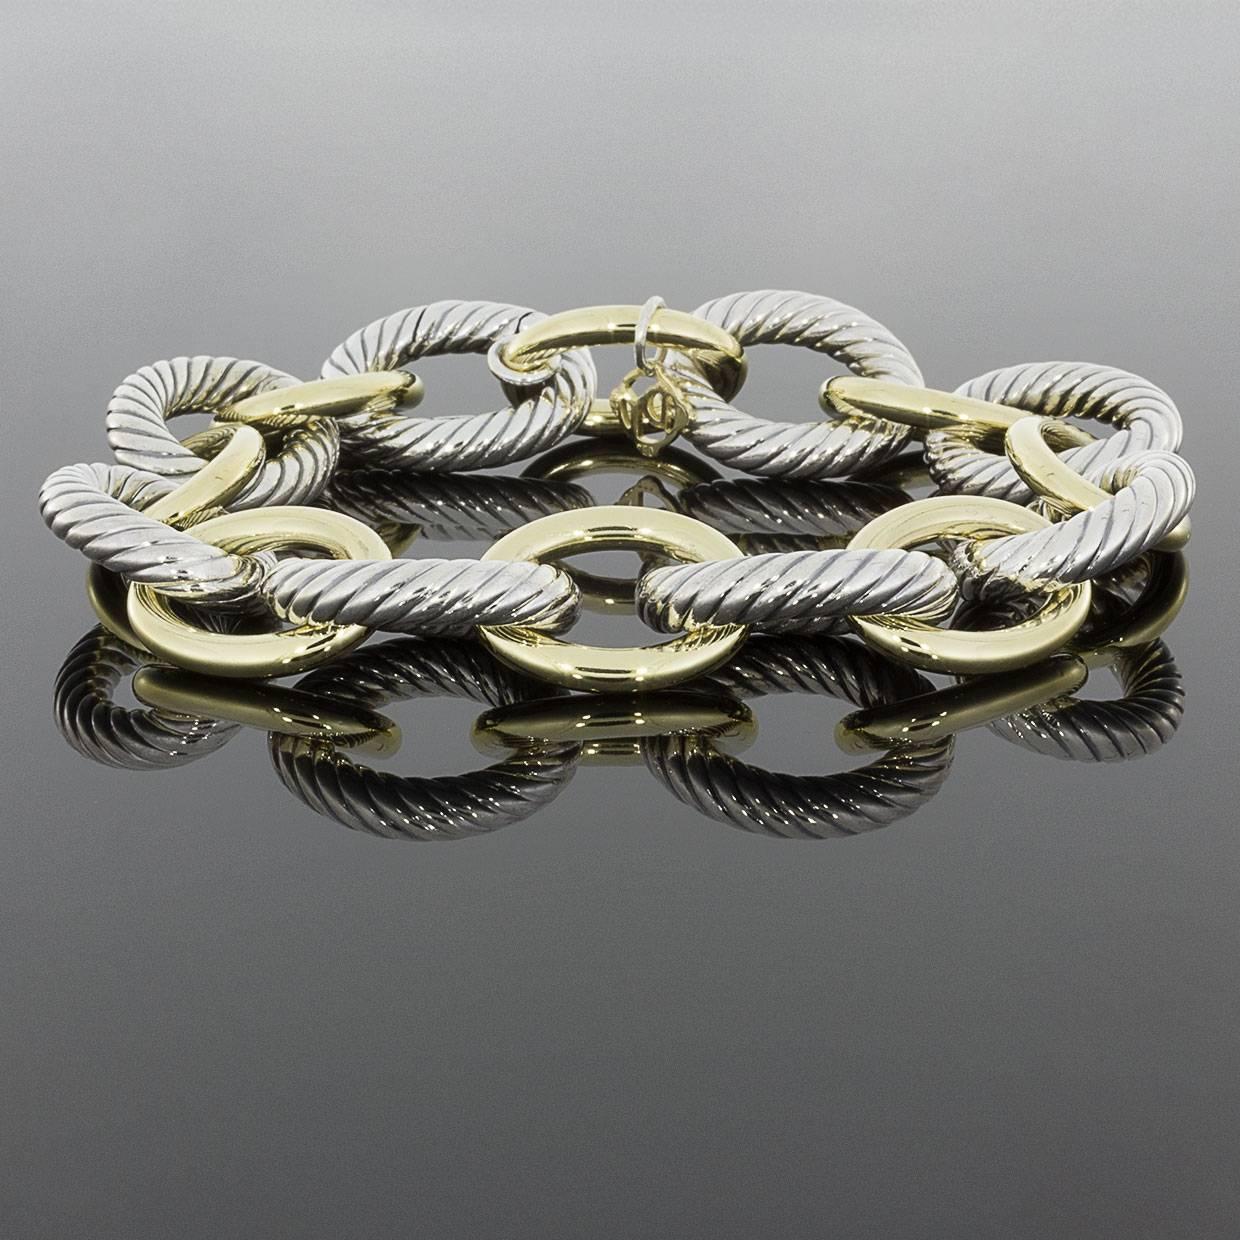 David Yurman's cable style jewelry has become his signature, the unifying element of every collection. This beautiful David Yurman bracelet is made of solid sterling silver & 18 karat yellow gold. The bracelet has a hidden hinge clasp. This classic